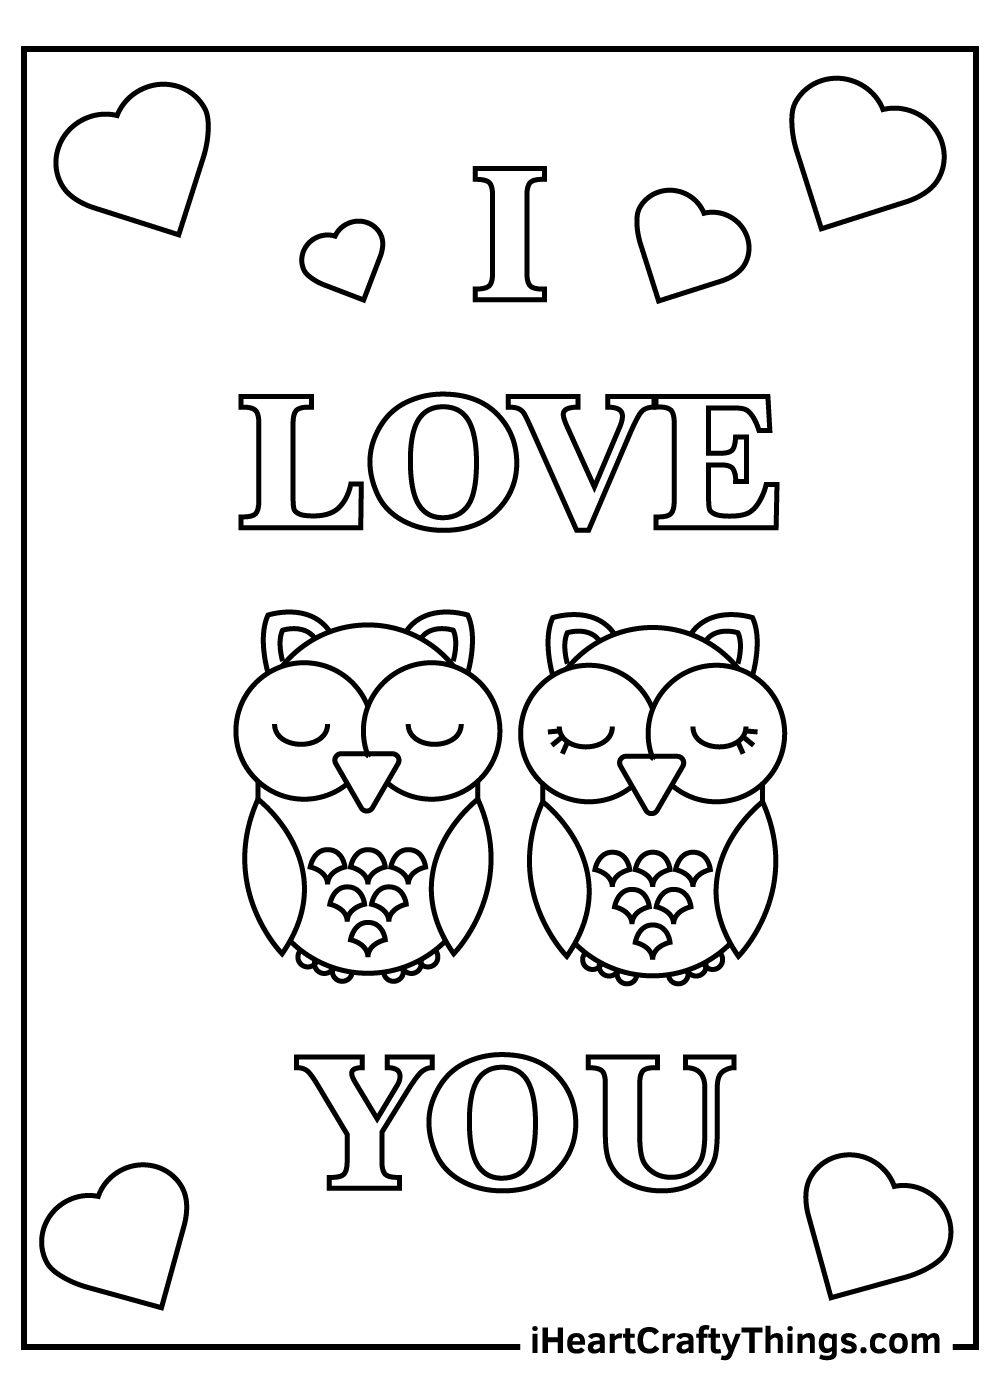 I Love You Coloring Pages Updated 2021